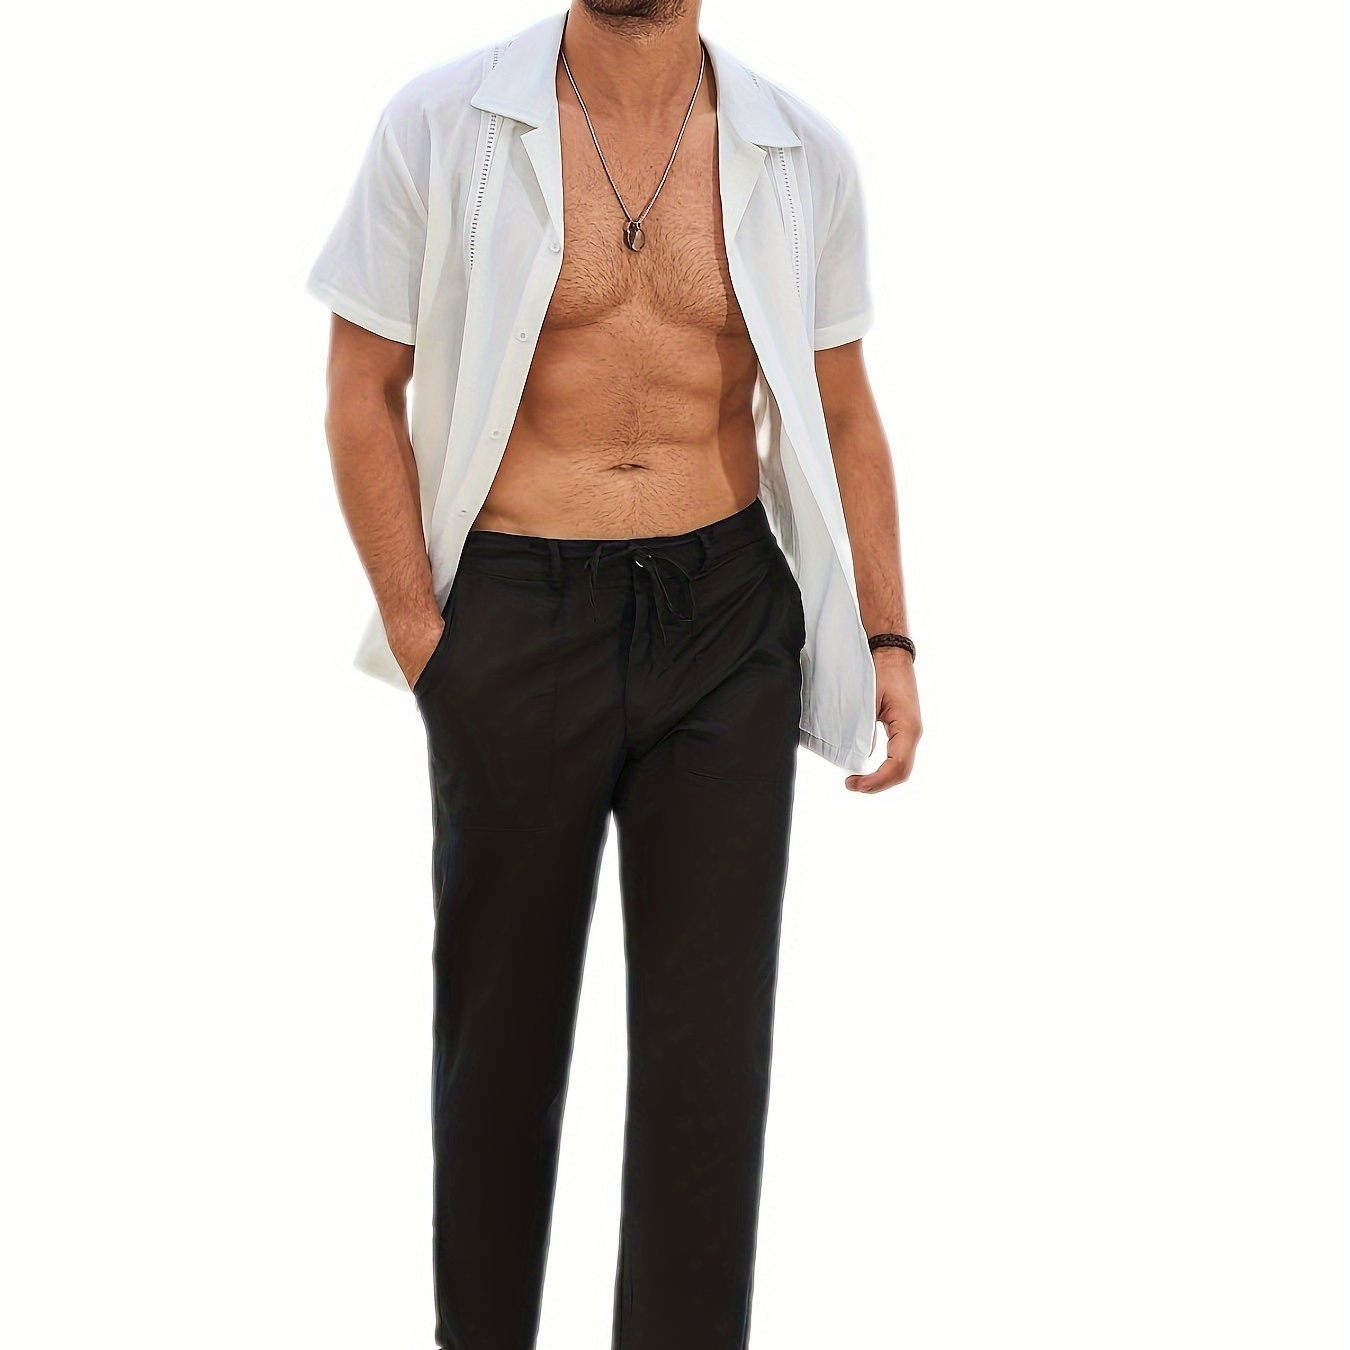 

Men's Casual Cotton And Linen Blend Pants, Straight-leg With Elastic Waist, Comfort Fit Trousers For Everyday Wear